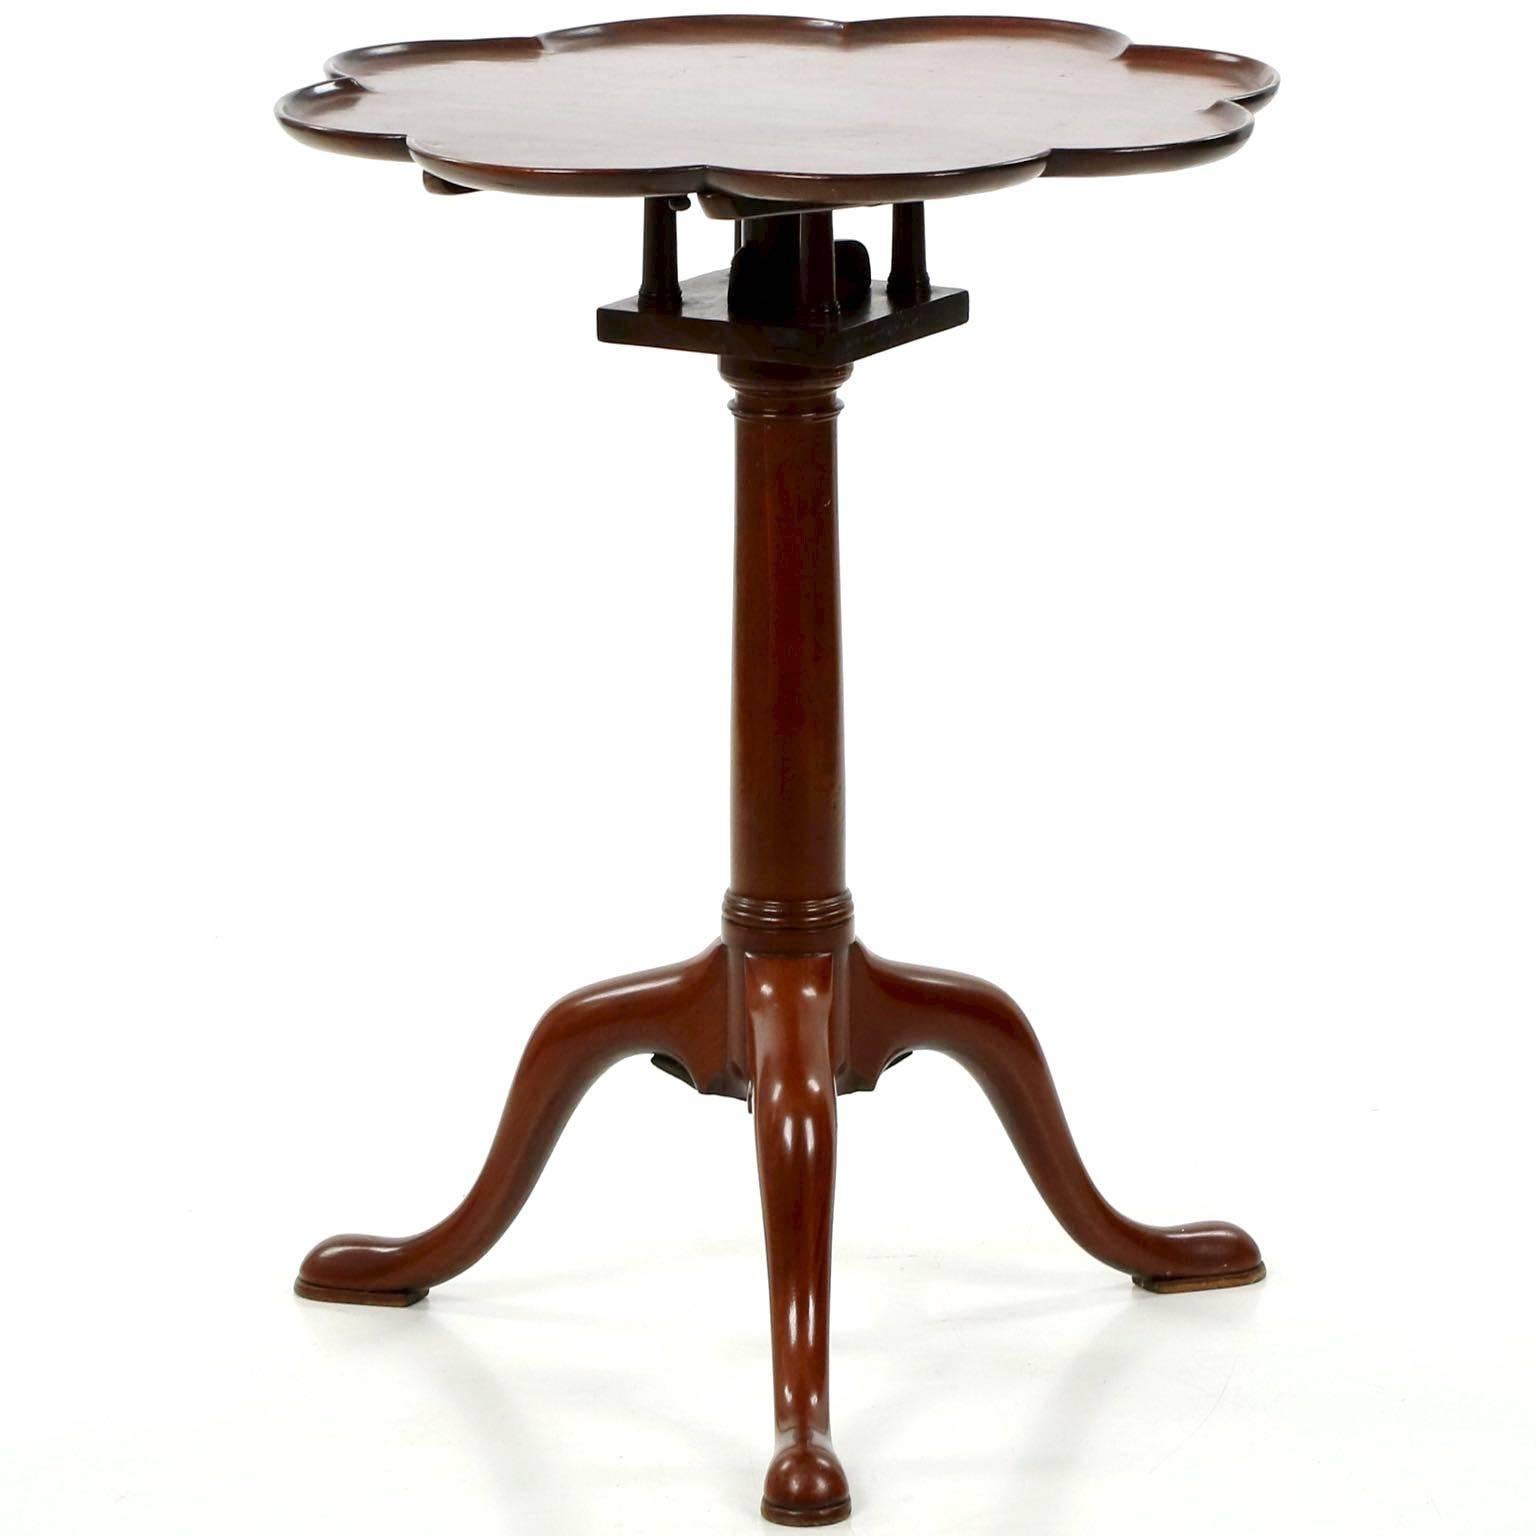 An attractive little table crafted of mahogany, the octofoil top is particularly distinctive; the form was generally used to allow service of tea, where the saucers could rest in each of the turrets with the pot at the center of the table. On these